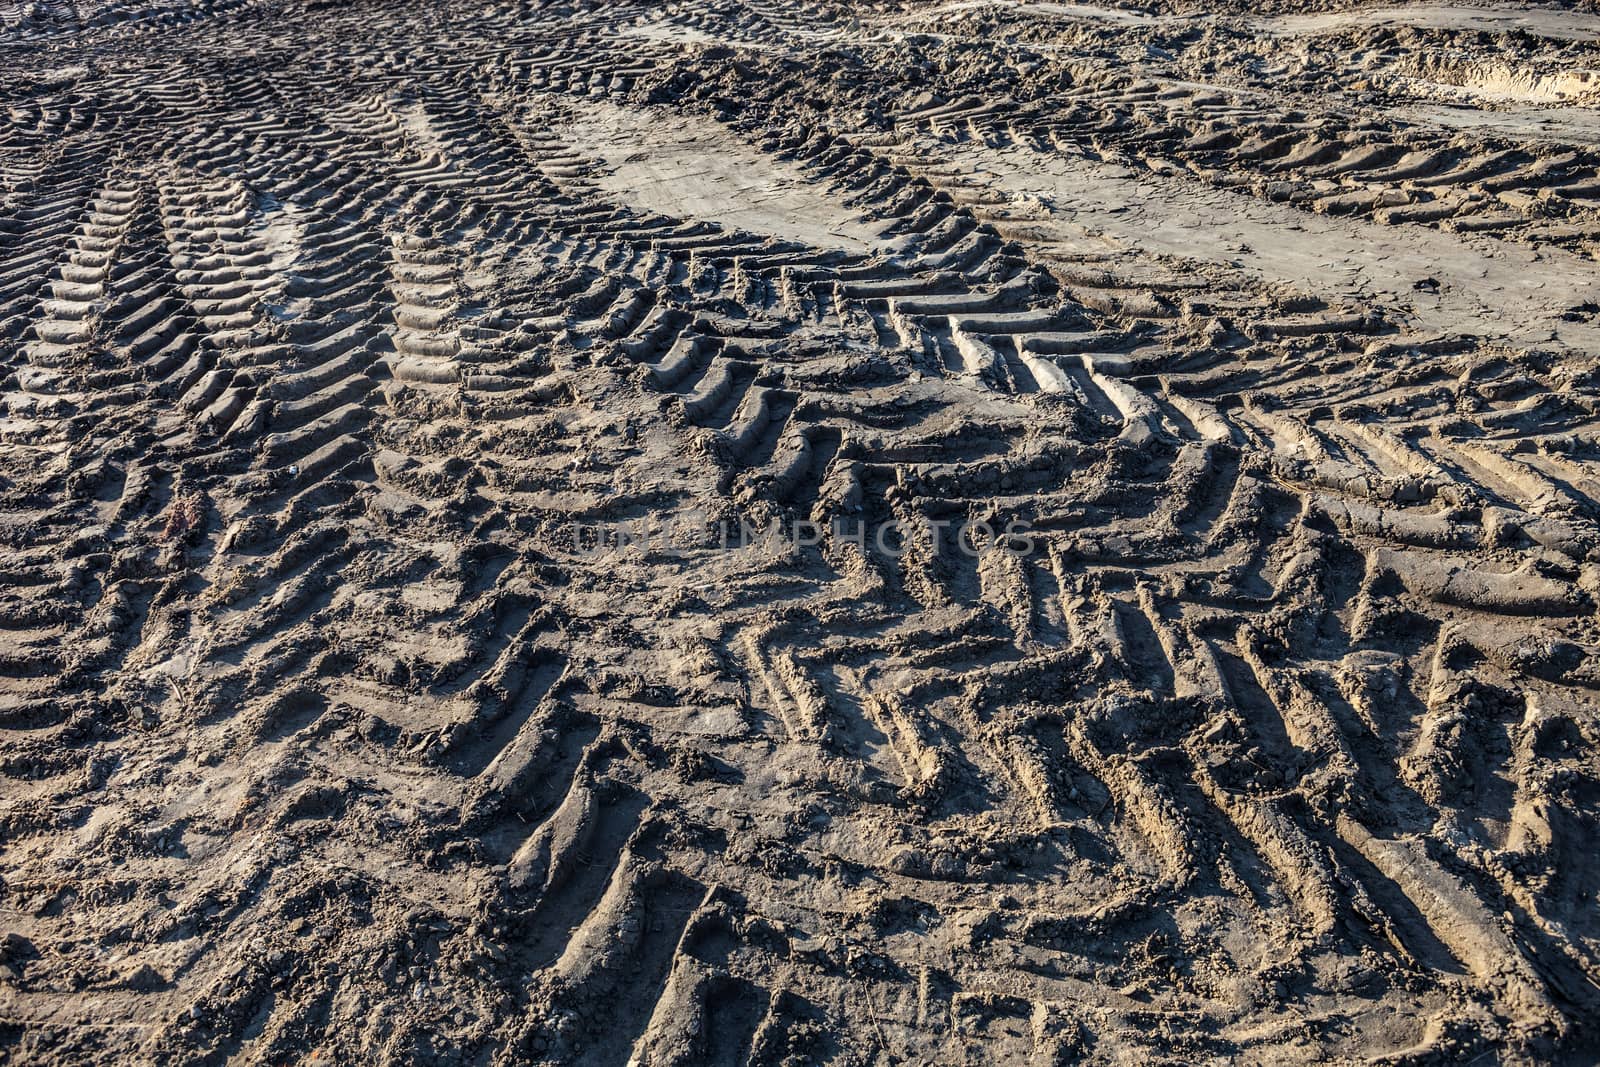 Wheel tracks on the ground by rootstocks